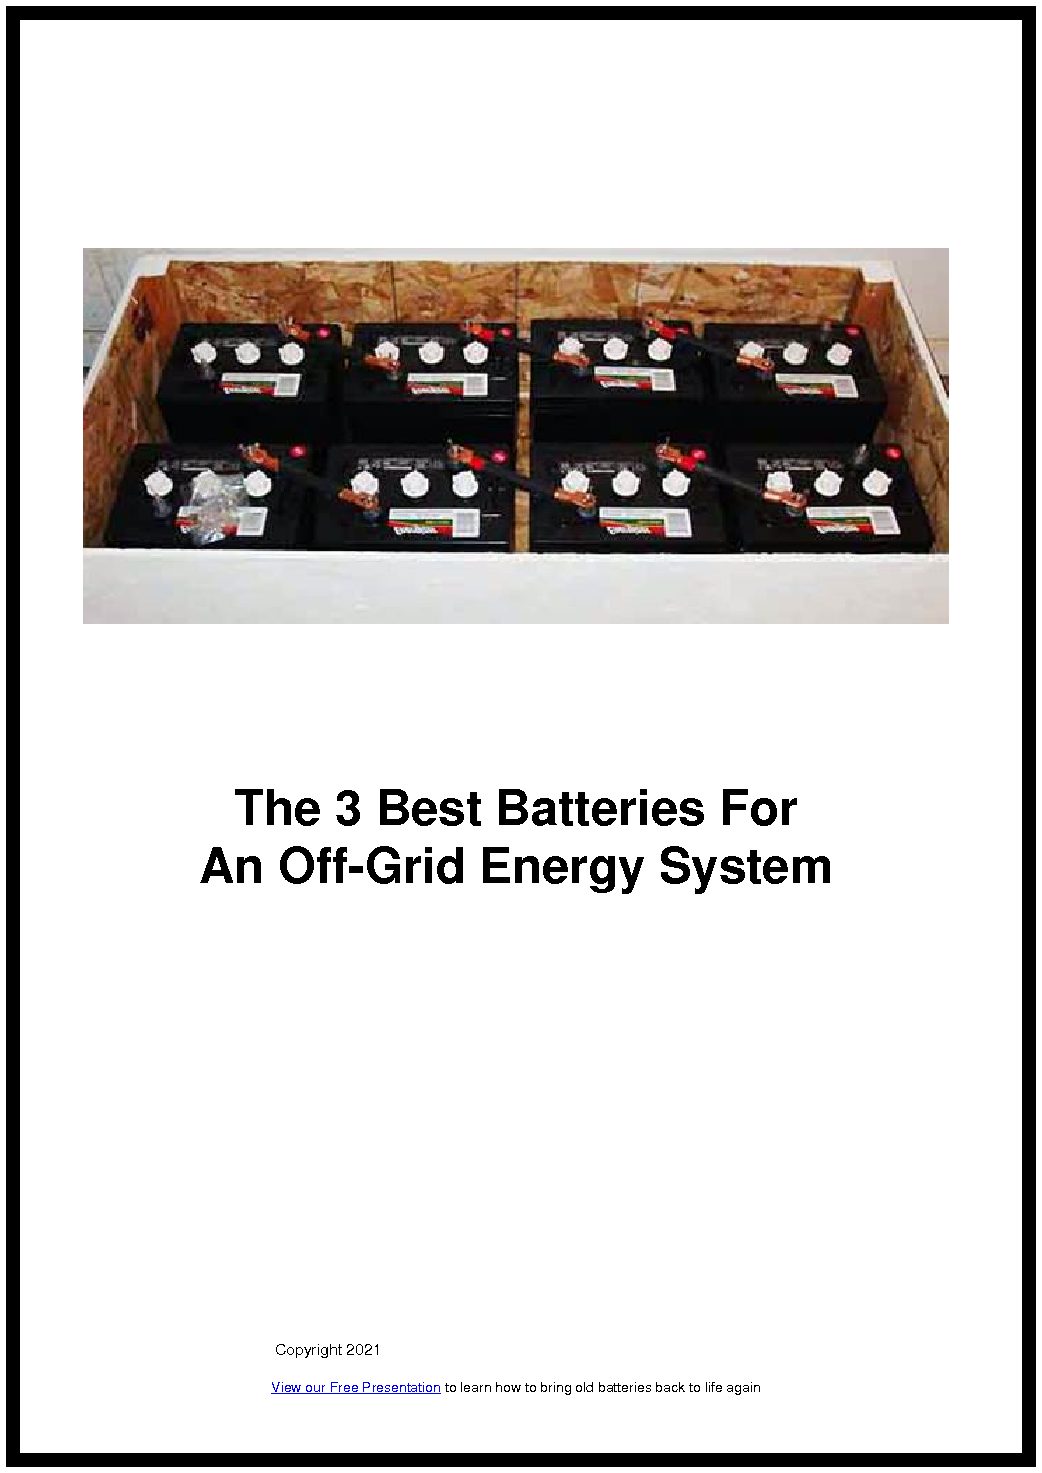 The 3 Best Batteries ForAn Off-Grid Energy System